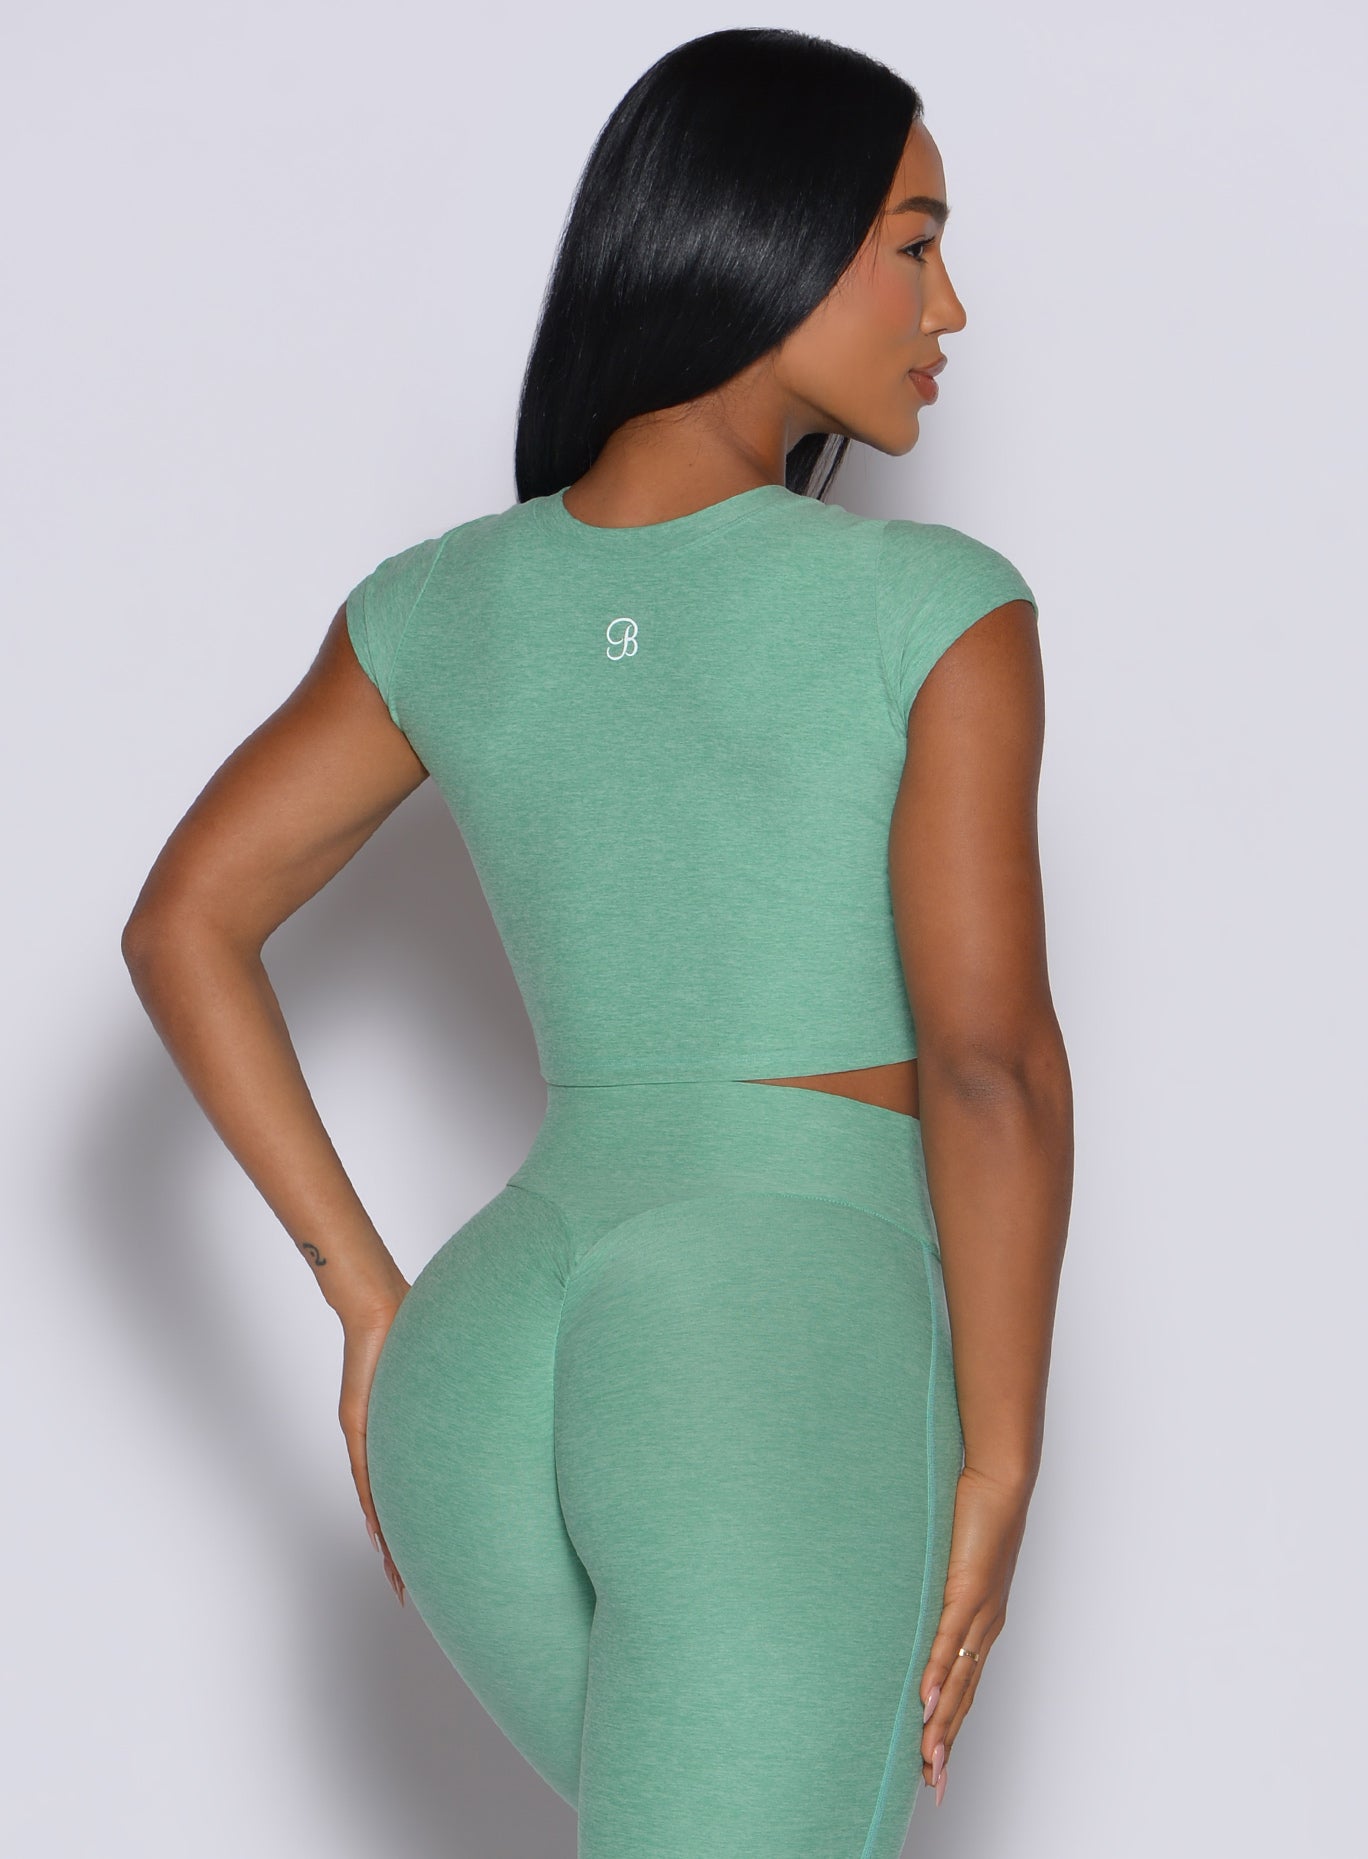 back profile view of a model wearing our fit fam active tee in sage color along with the matching leggings